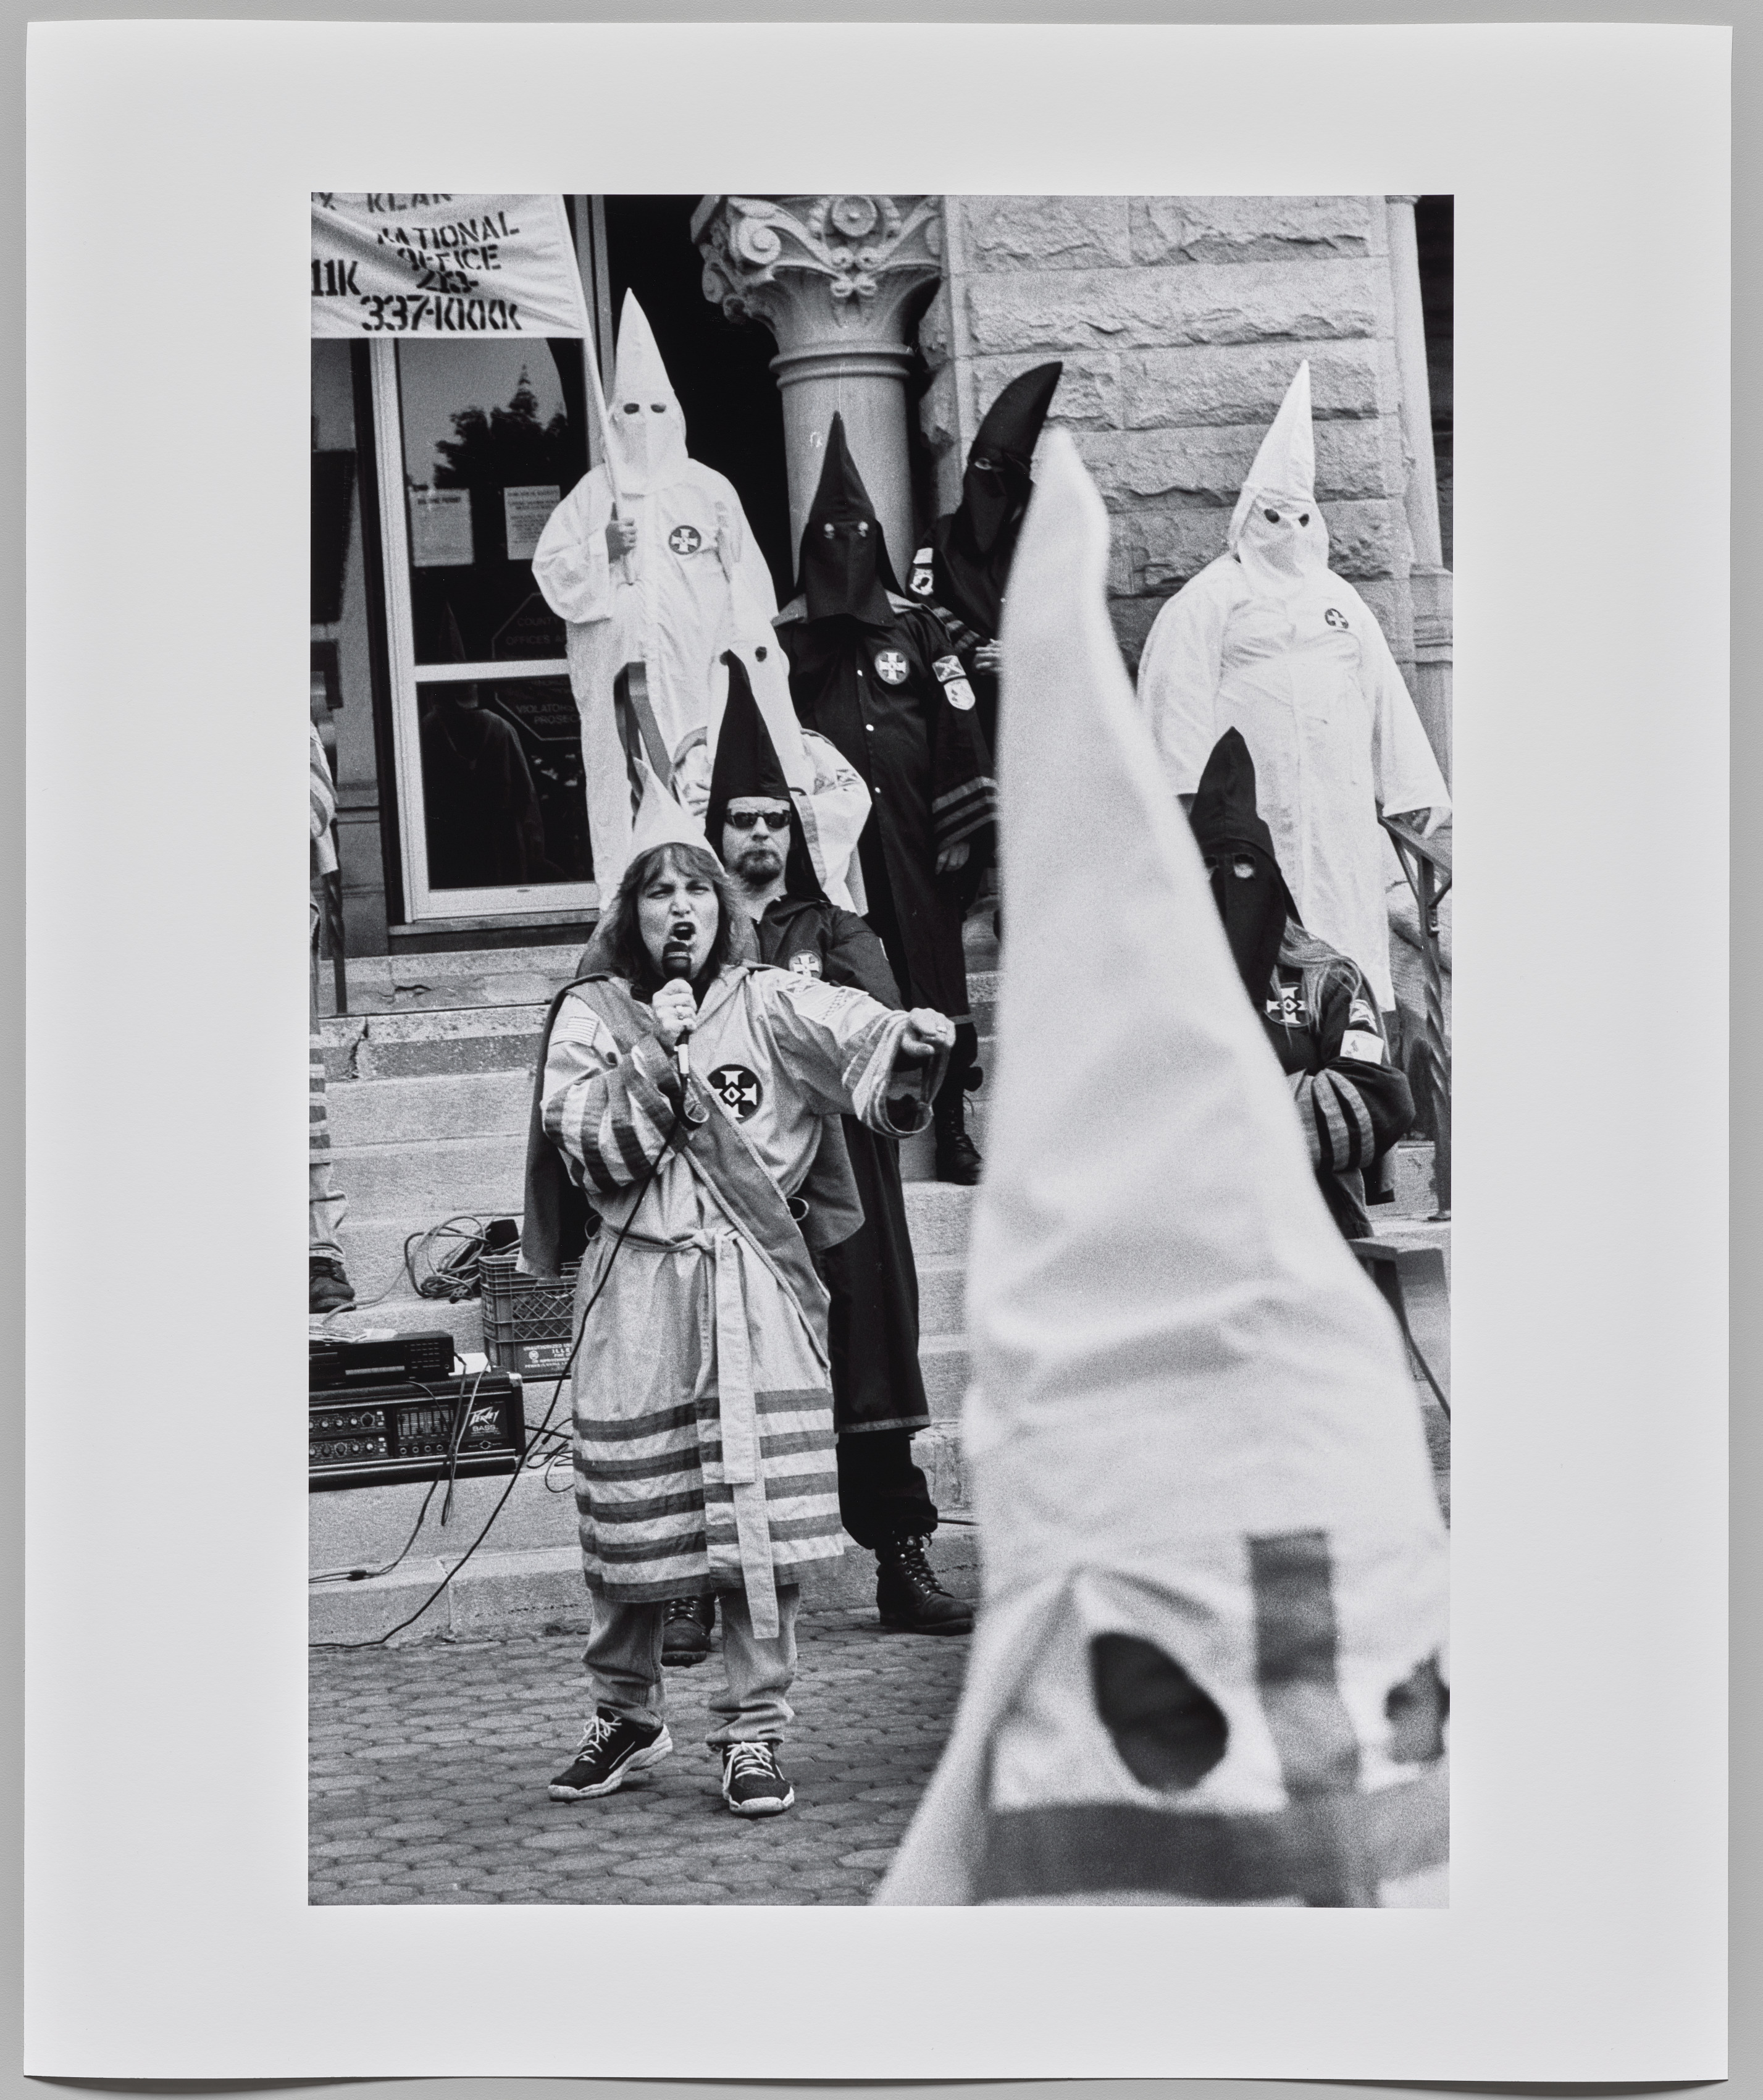 Female Grand Dragon at Ku Klux Klan Rally; women are brought into the KKK on the premise of protecting womanhood